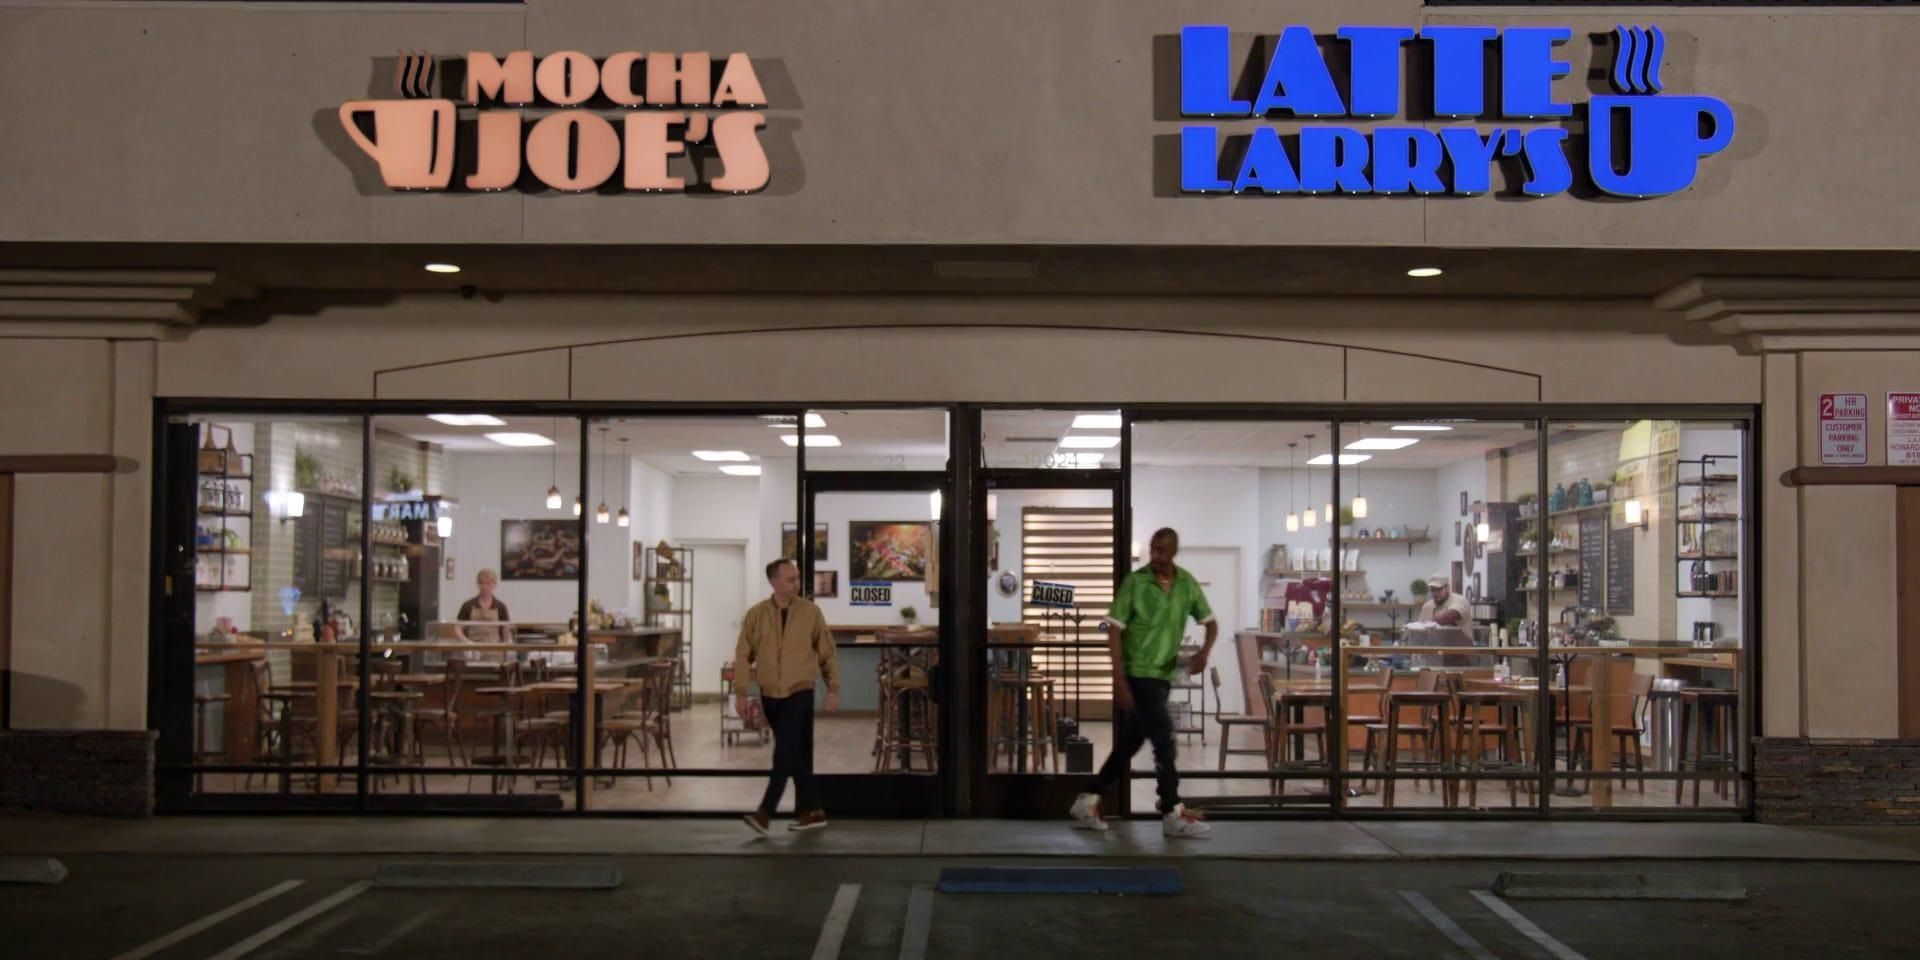 Latte Larry's in Curb Your Enthusiasm